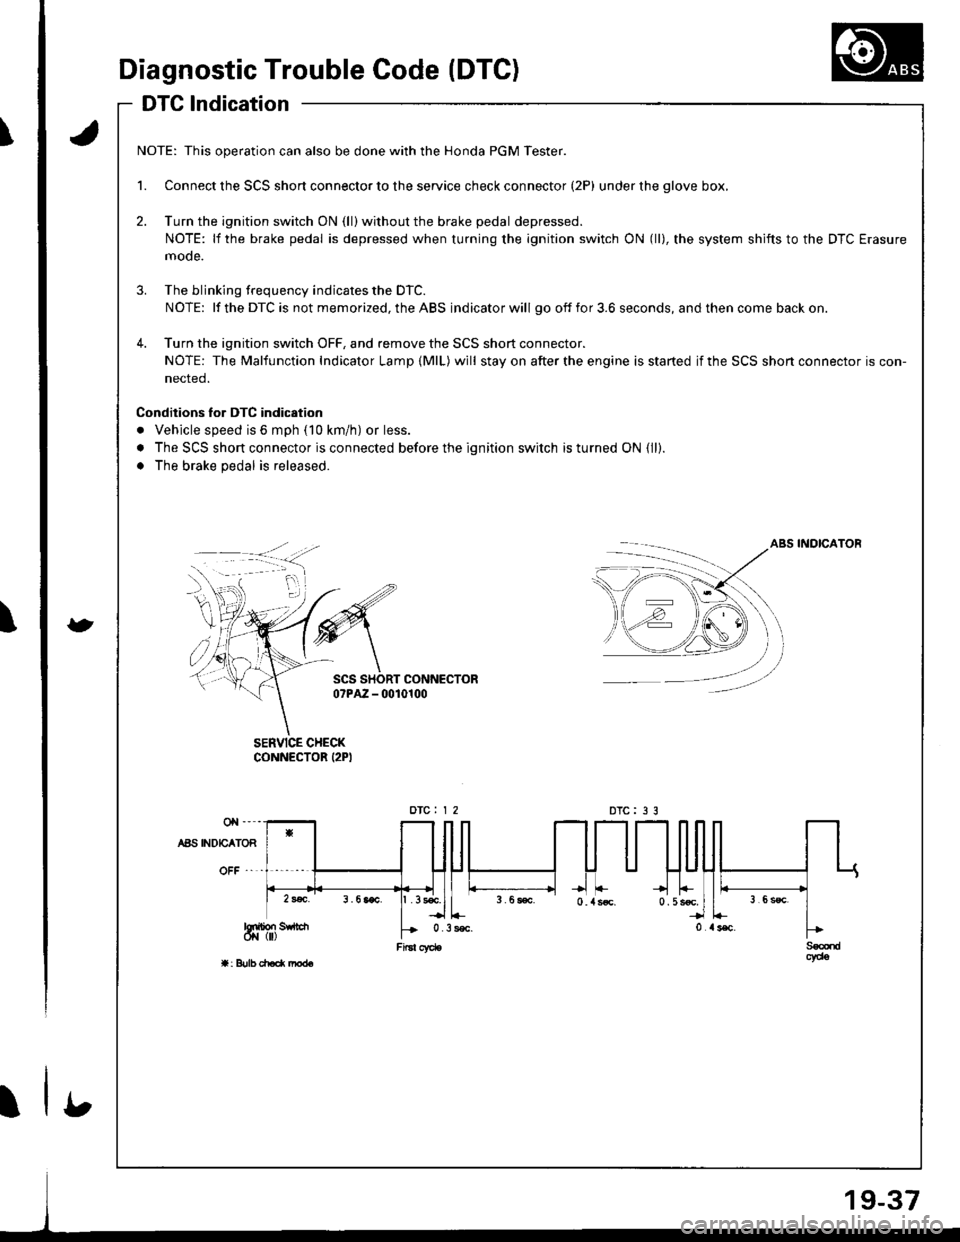 HONDA INTEGRA 1998 4.G Workshop Manual I
\
I
Diagnostic Trouble Code (DTC)
DTG lndication
a
t
NOTE: This operation can also be done with the Honda PGM Tester.
1. Connect the SCS short connector to the service check connector (2P) under the